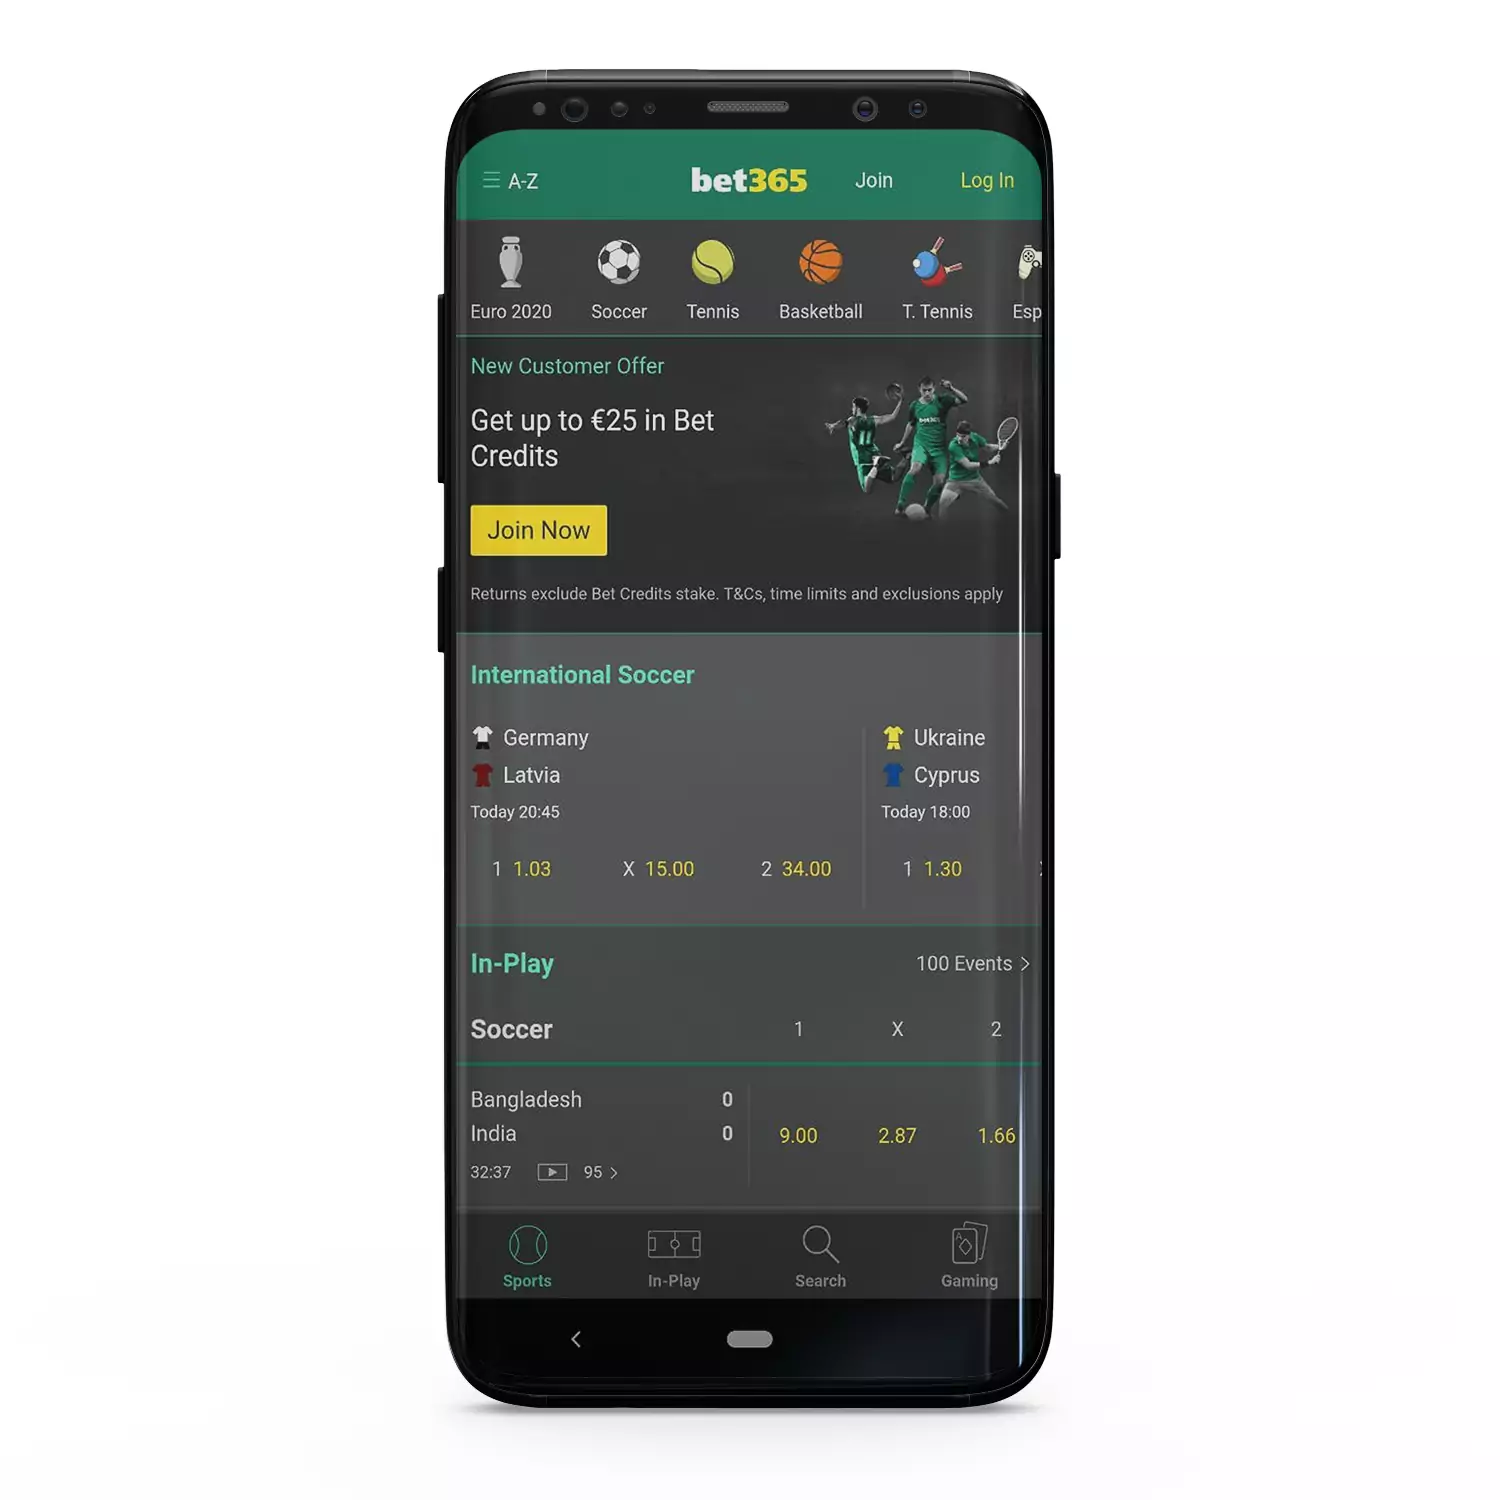 The Bet365 app is available on Android and iOS smartphones.